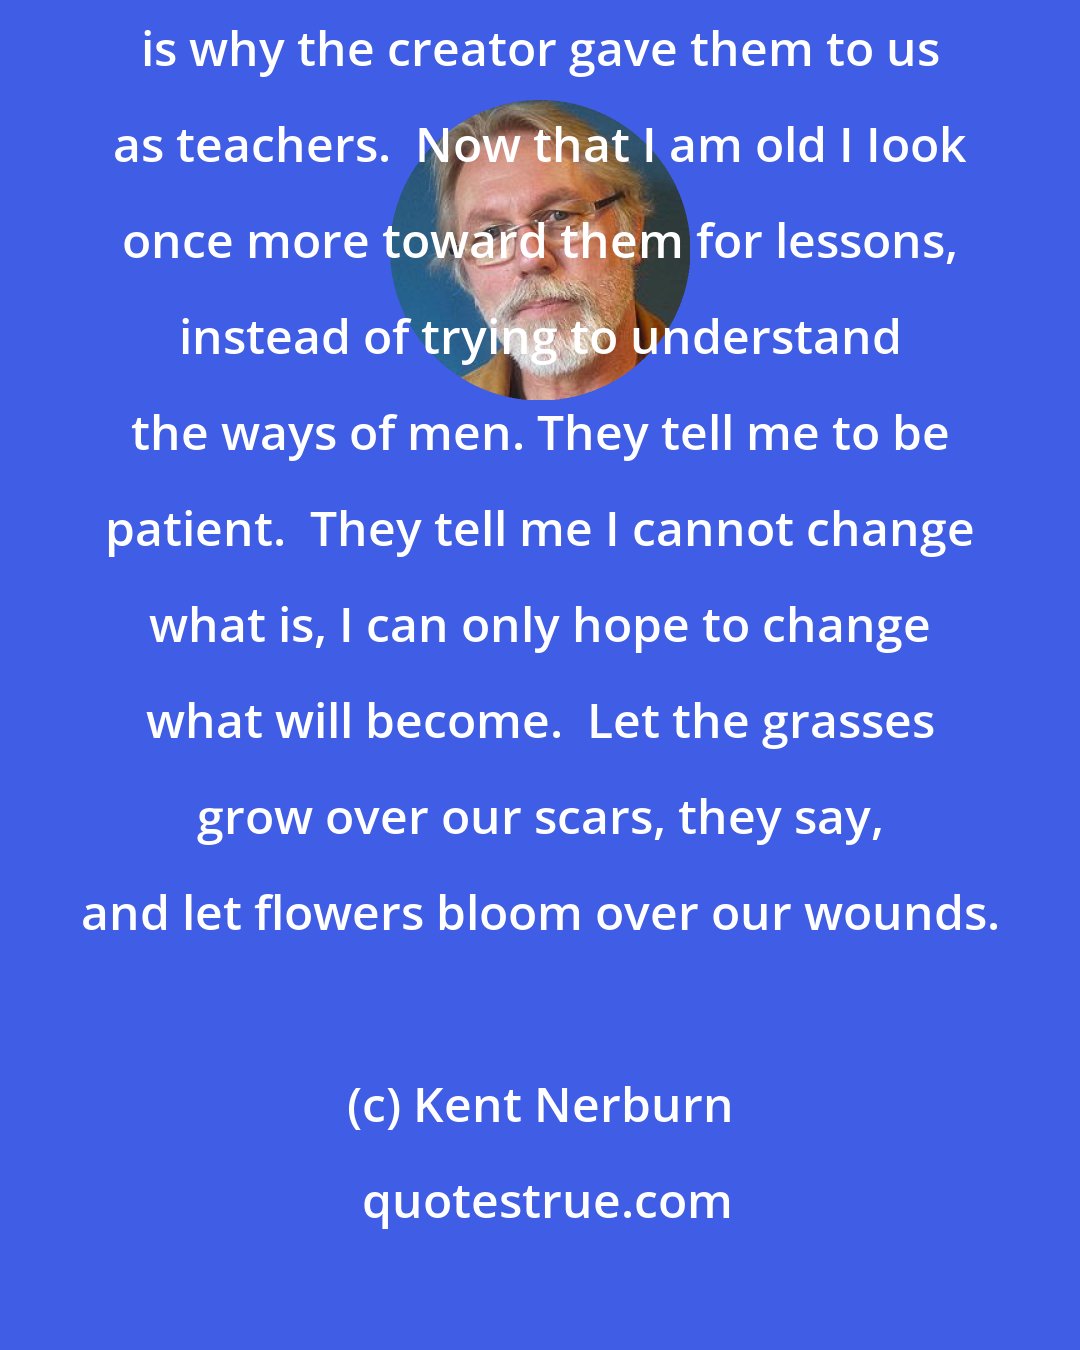 Kent Nerburn: It is not easy for a man to be as great as a mountain or a forest.  But that is why the creator gave them to us as teachers.  Now that I am old I Iook once more toward them for lessons, instead of trying to understand the ways of men. They tell me to be patient.  They tell me I cannot change what is, I can only hope to change what will become.  Let the grasses grow over our scars, they say, and let flowers bloom over our wounds.